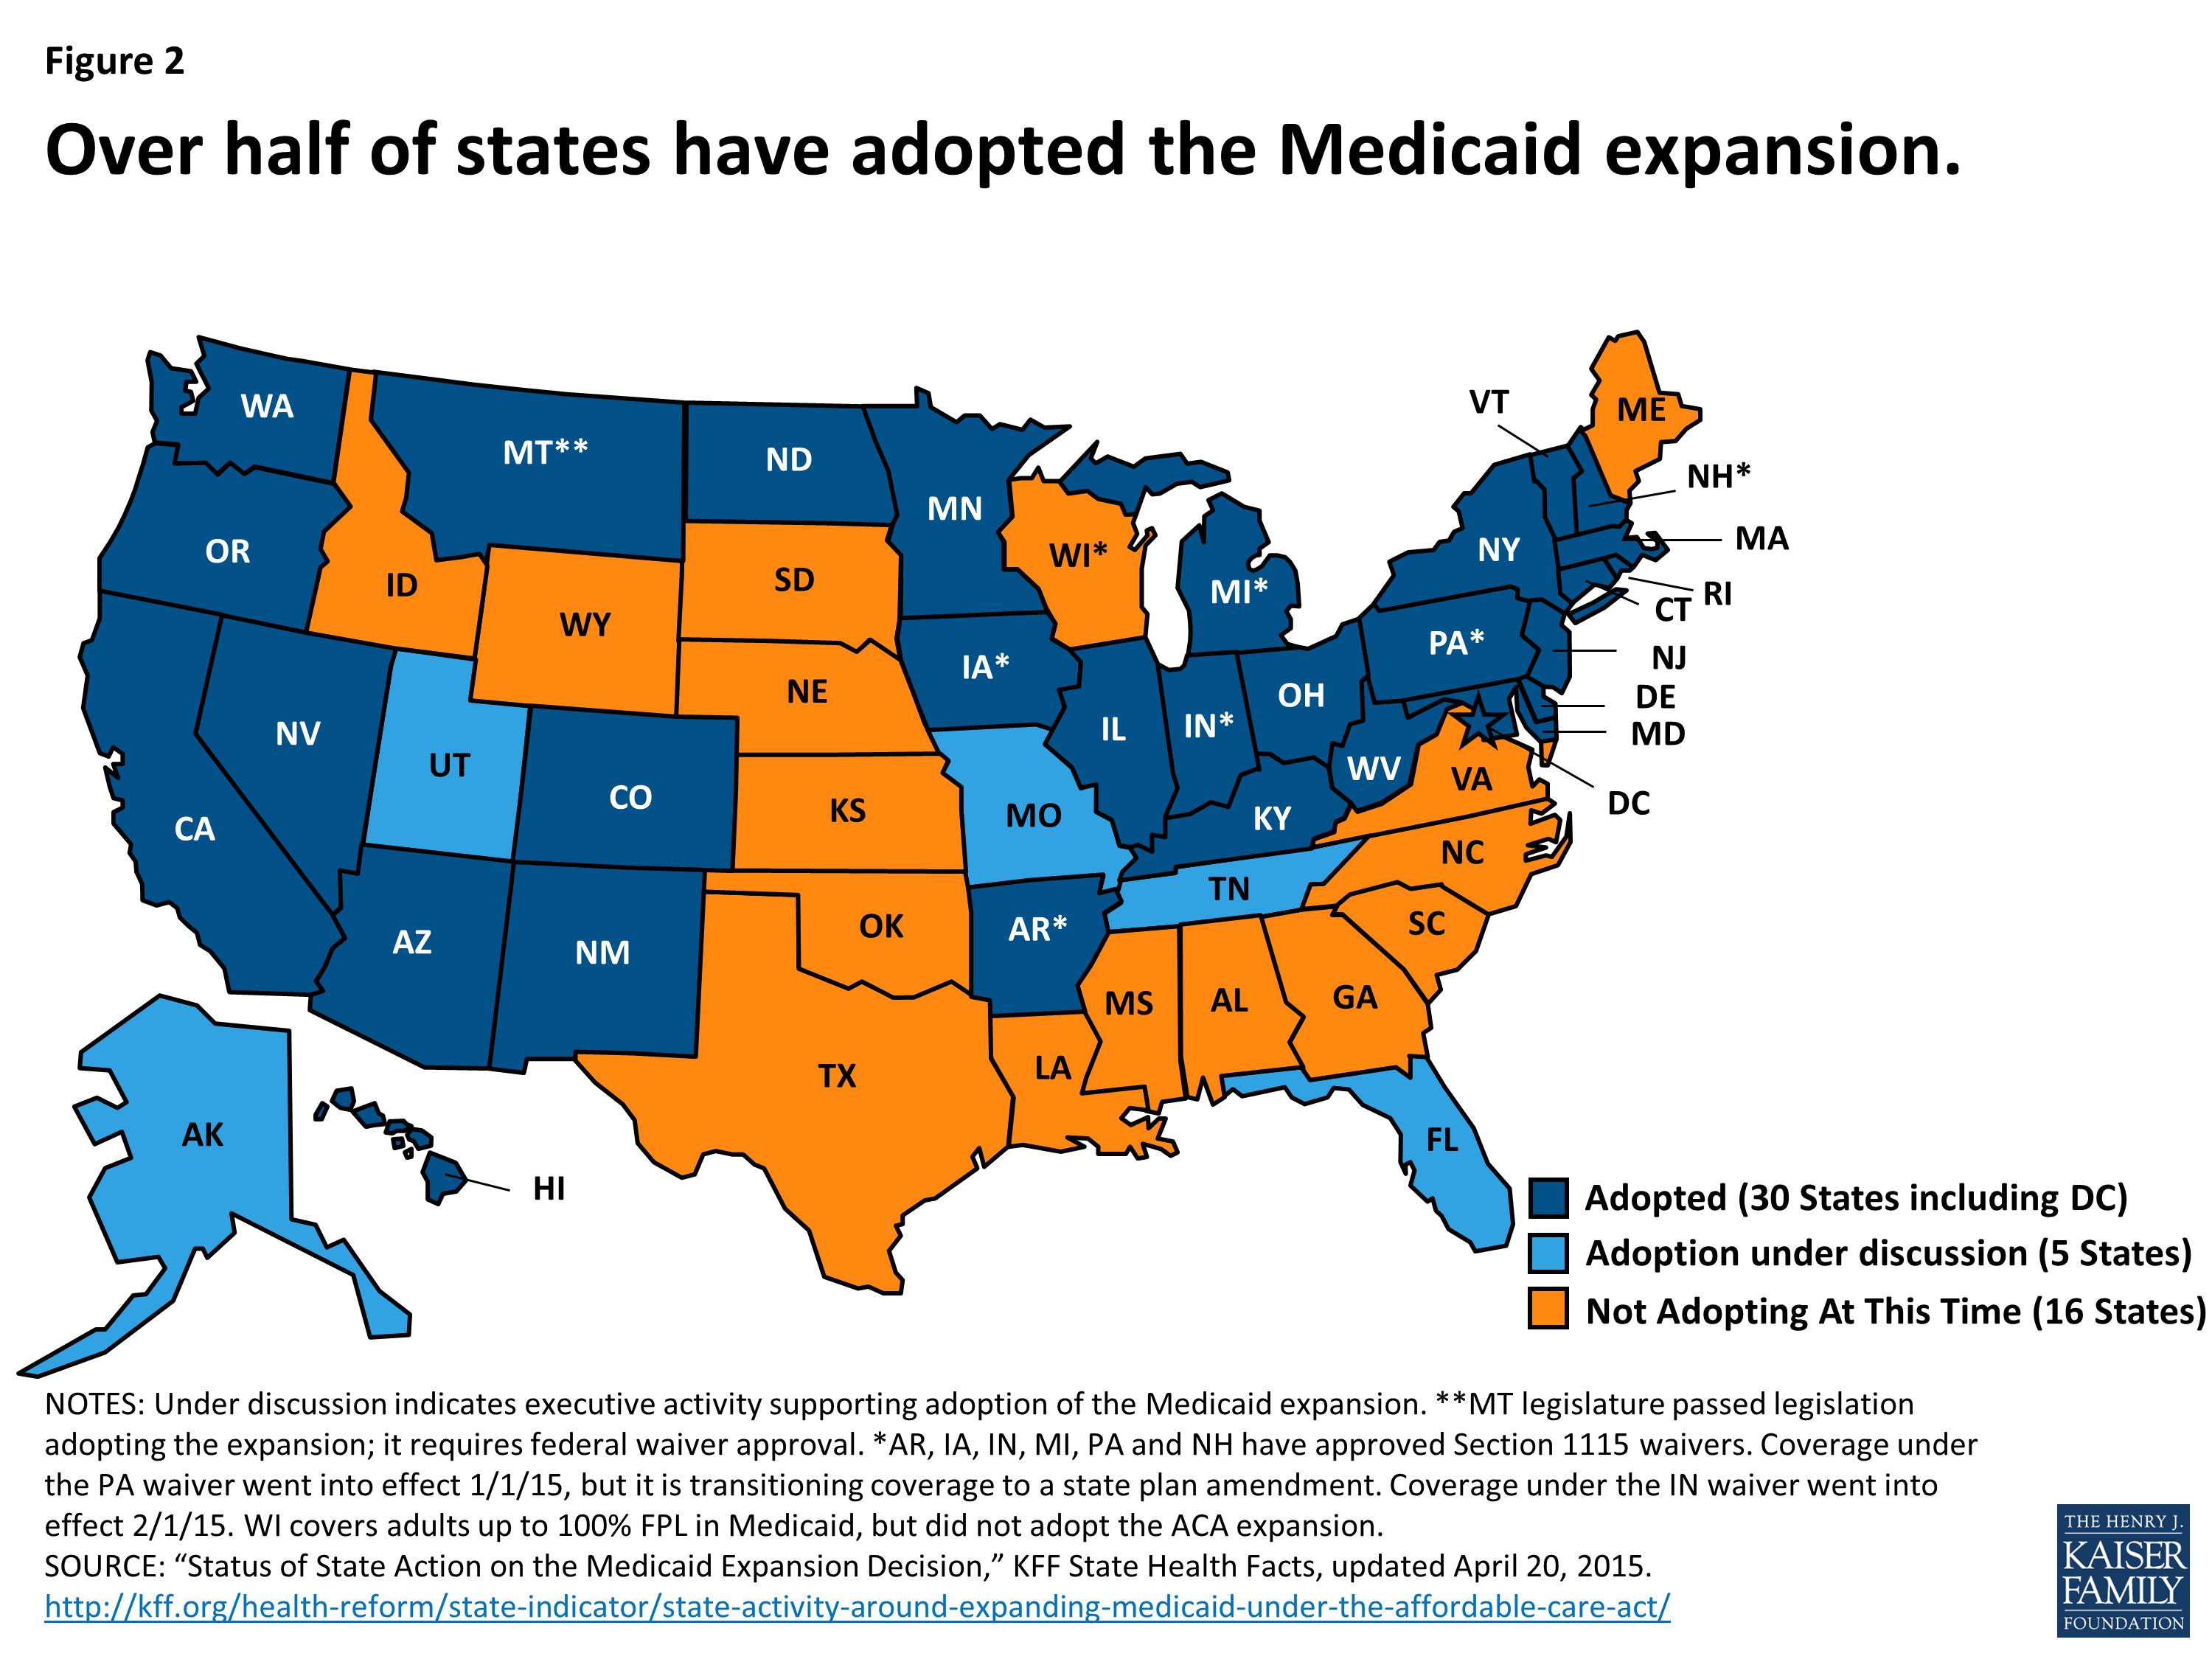 Medicaid Financing How Does it Work and What are the Implications? KFF